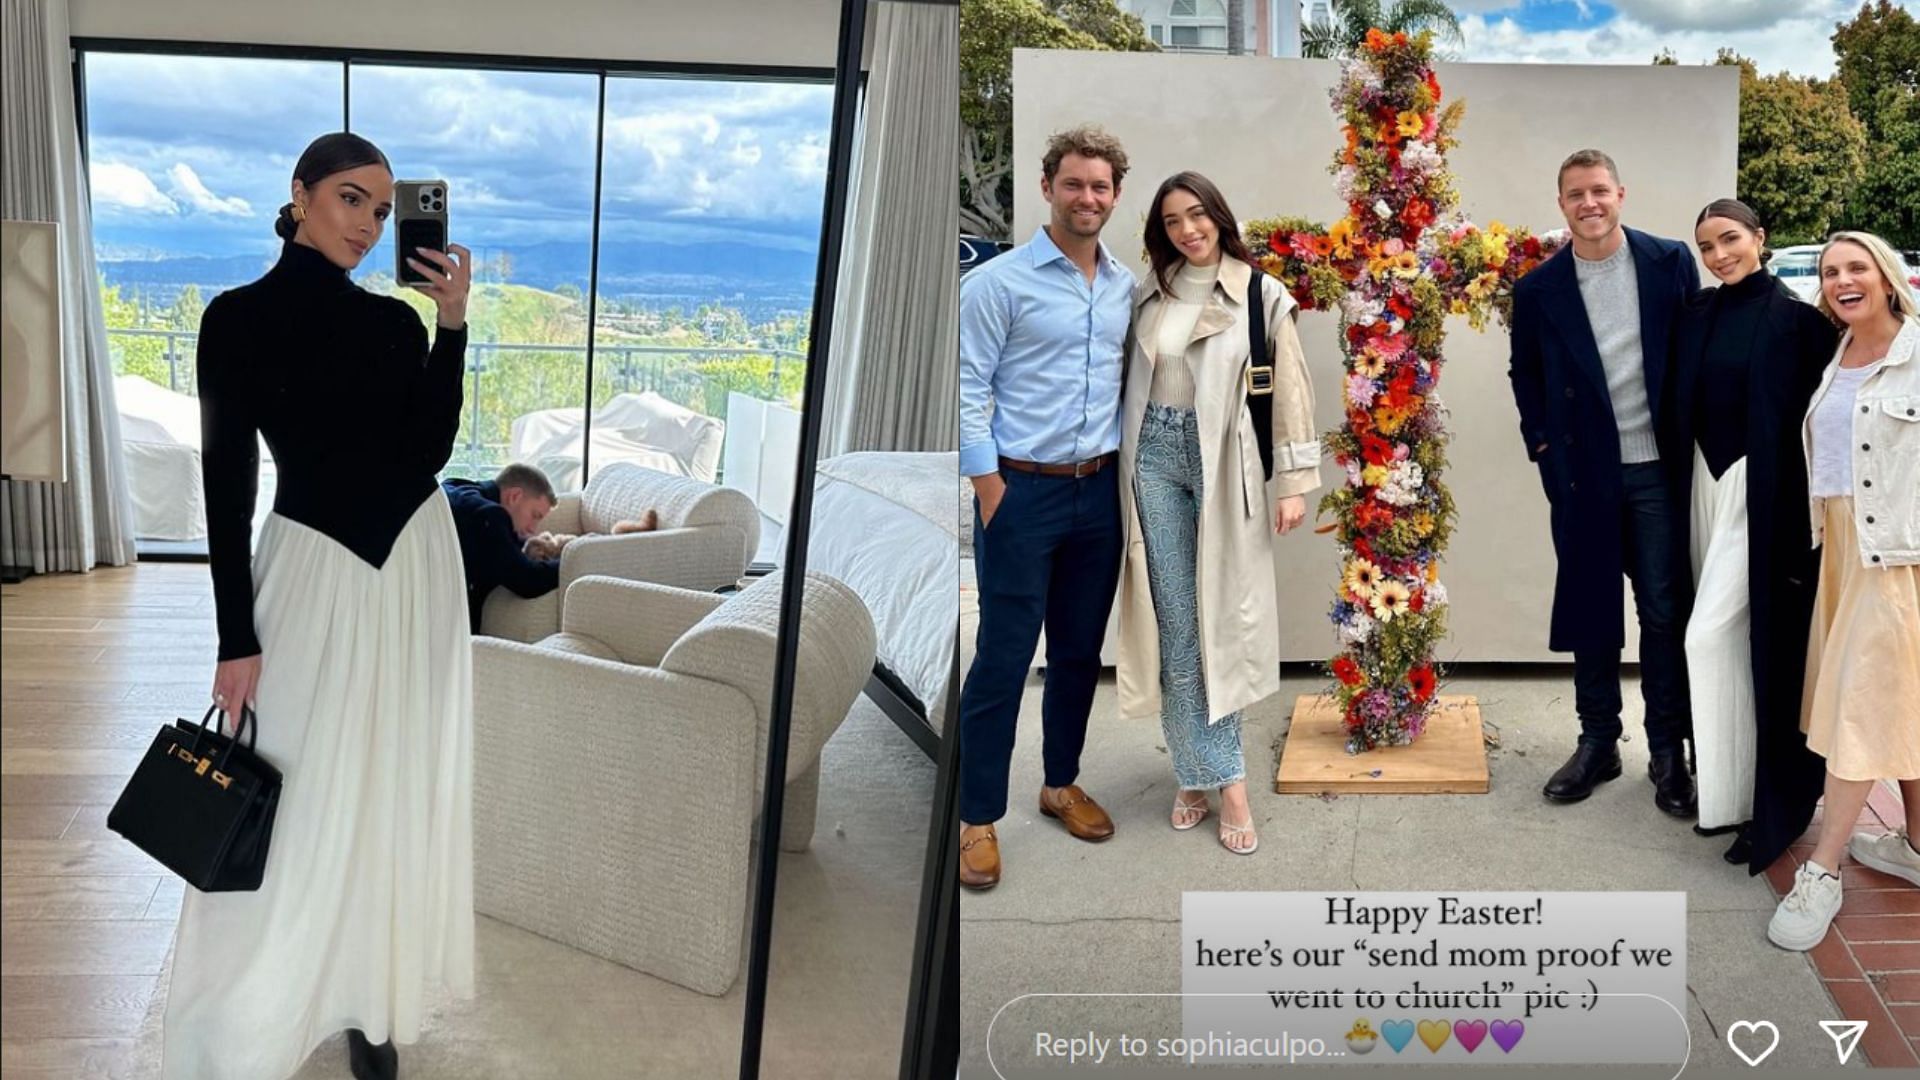 Christian McCaffrey spends picture-perfect Easter with fiancee Olivia Culpo, sister-in-law Sophia